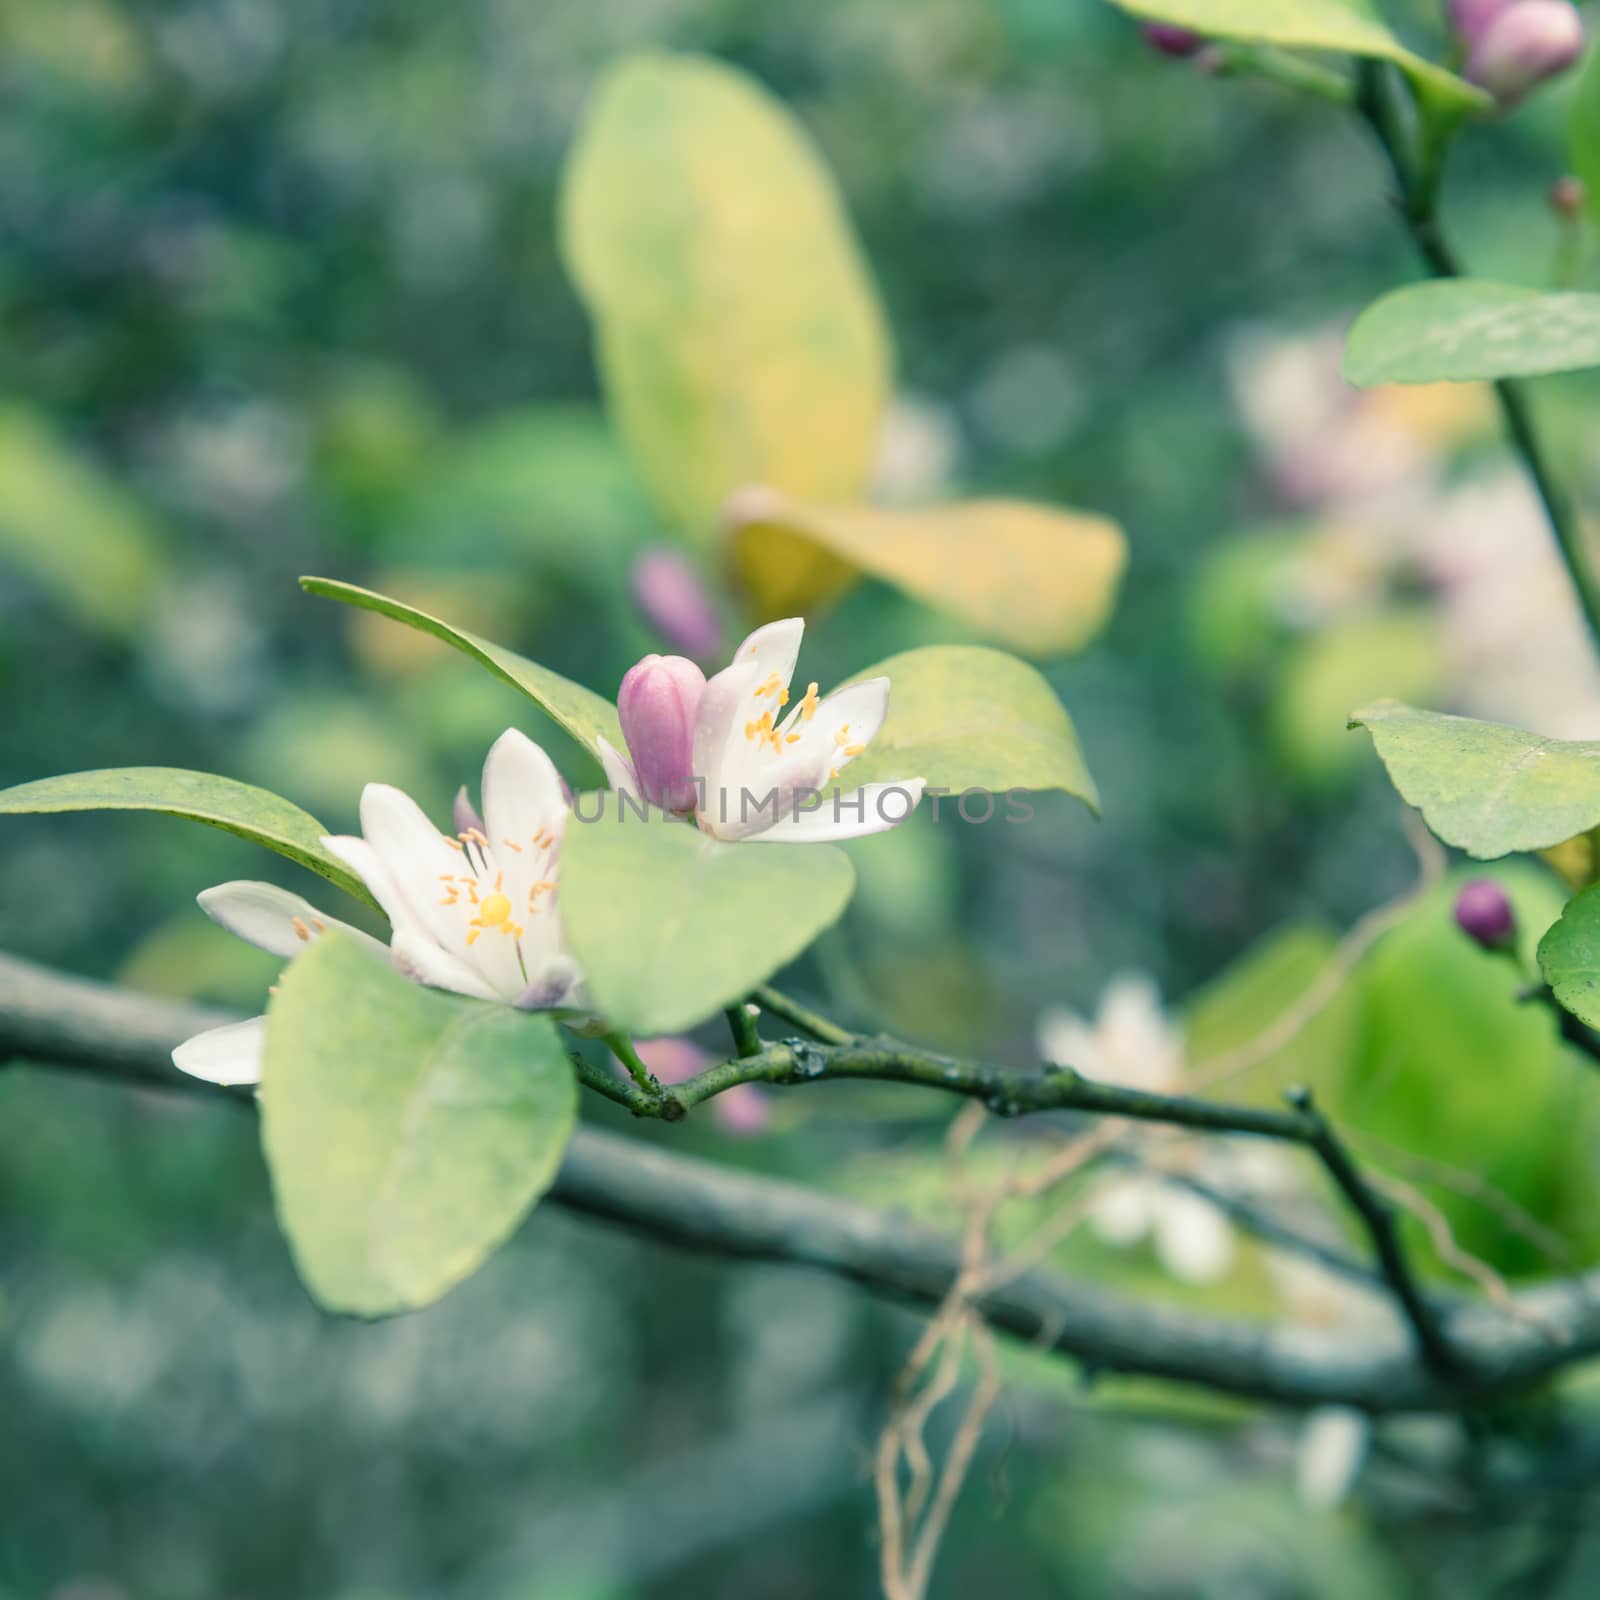 Beautiful blooming pink and white flowers and burgeons on a lemon tree branch by trongnguyen